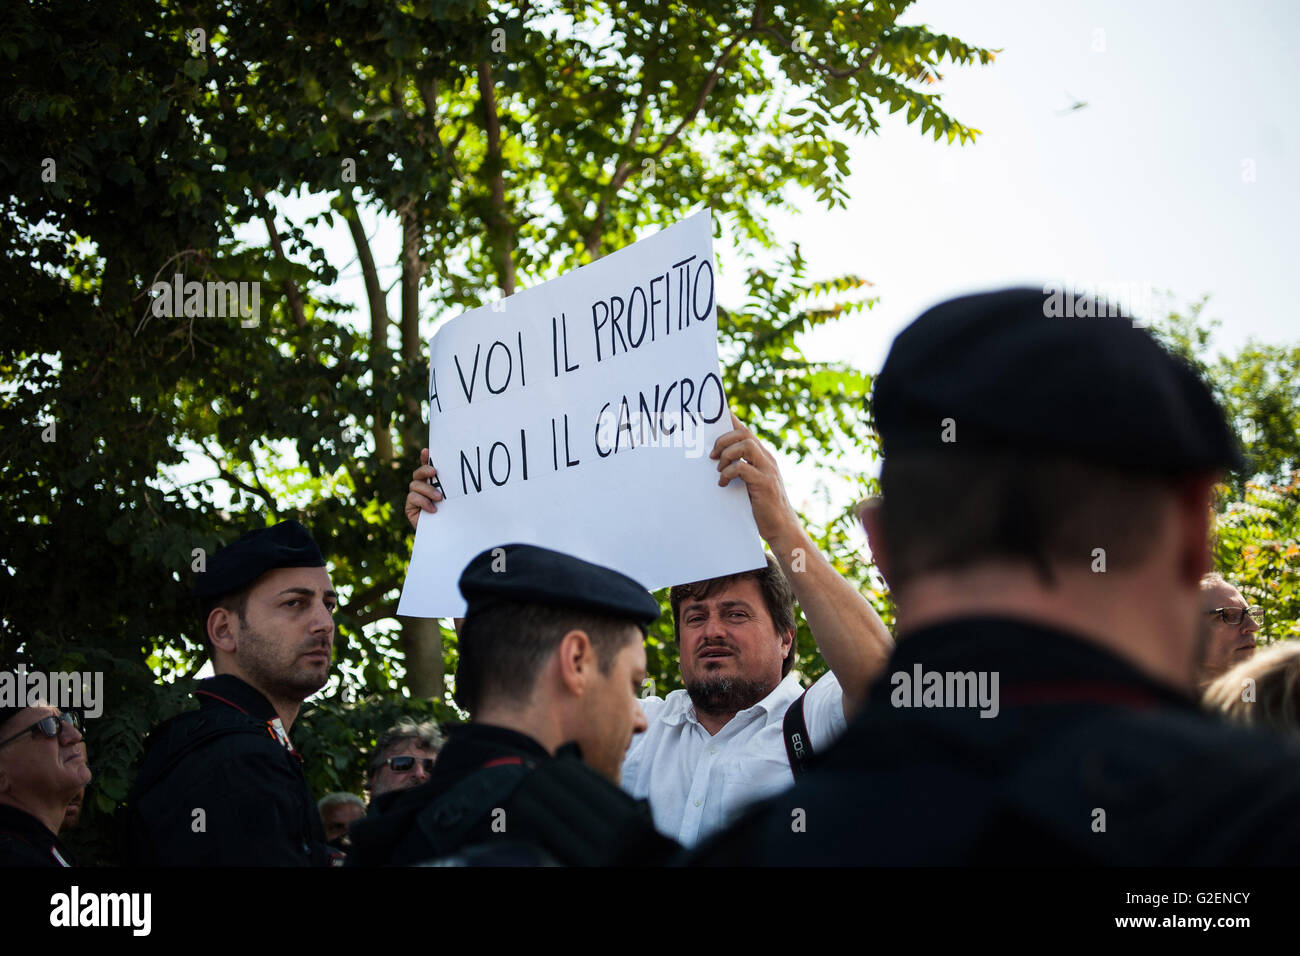 30/05/2016 - Taverna del Re, Giugliano, Napoli - Pollution waste bales removal plan "Land of Fire" (Terra dei Fuochi). Workers of the regional basin consortiums protest near the "Taverna del Re" storage site. The refuse plan for resolution of territory reclamation starts today. It has been funded by region Campania and it will affect the area in the North of Naples that was used by Camorra for the illegal disposal of toxic refuse during the last few years. The plan includes the transfer of 5 million polluting waste bales from the storage site of "Taverna del Re" between Giugliano and Villa Lit Stock Photo